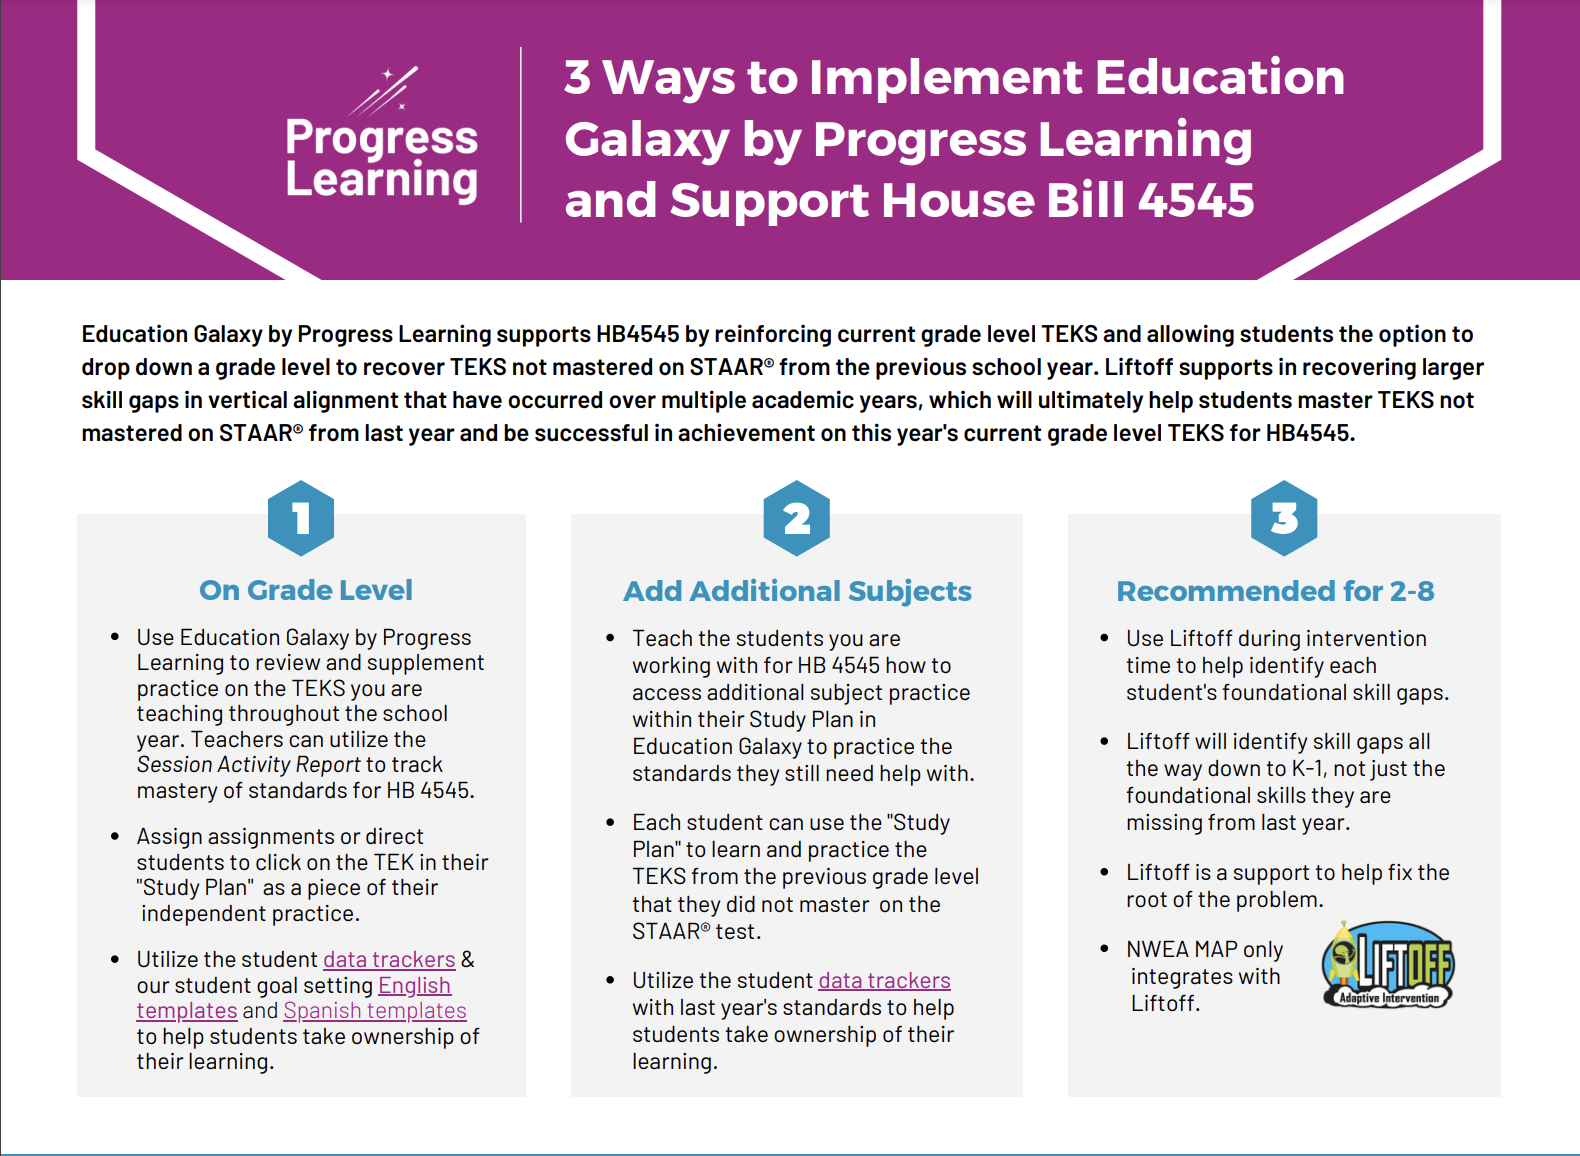 tx-house-bill-4545-empowering-every-student-and-educator